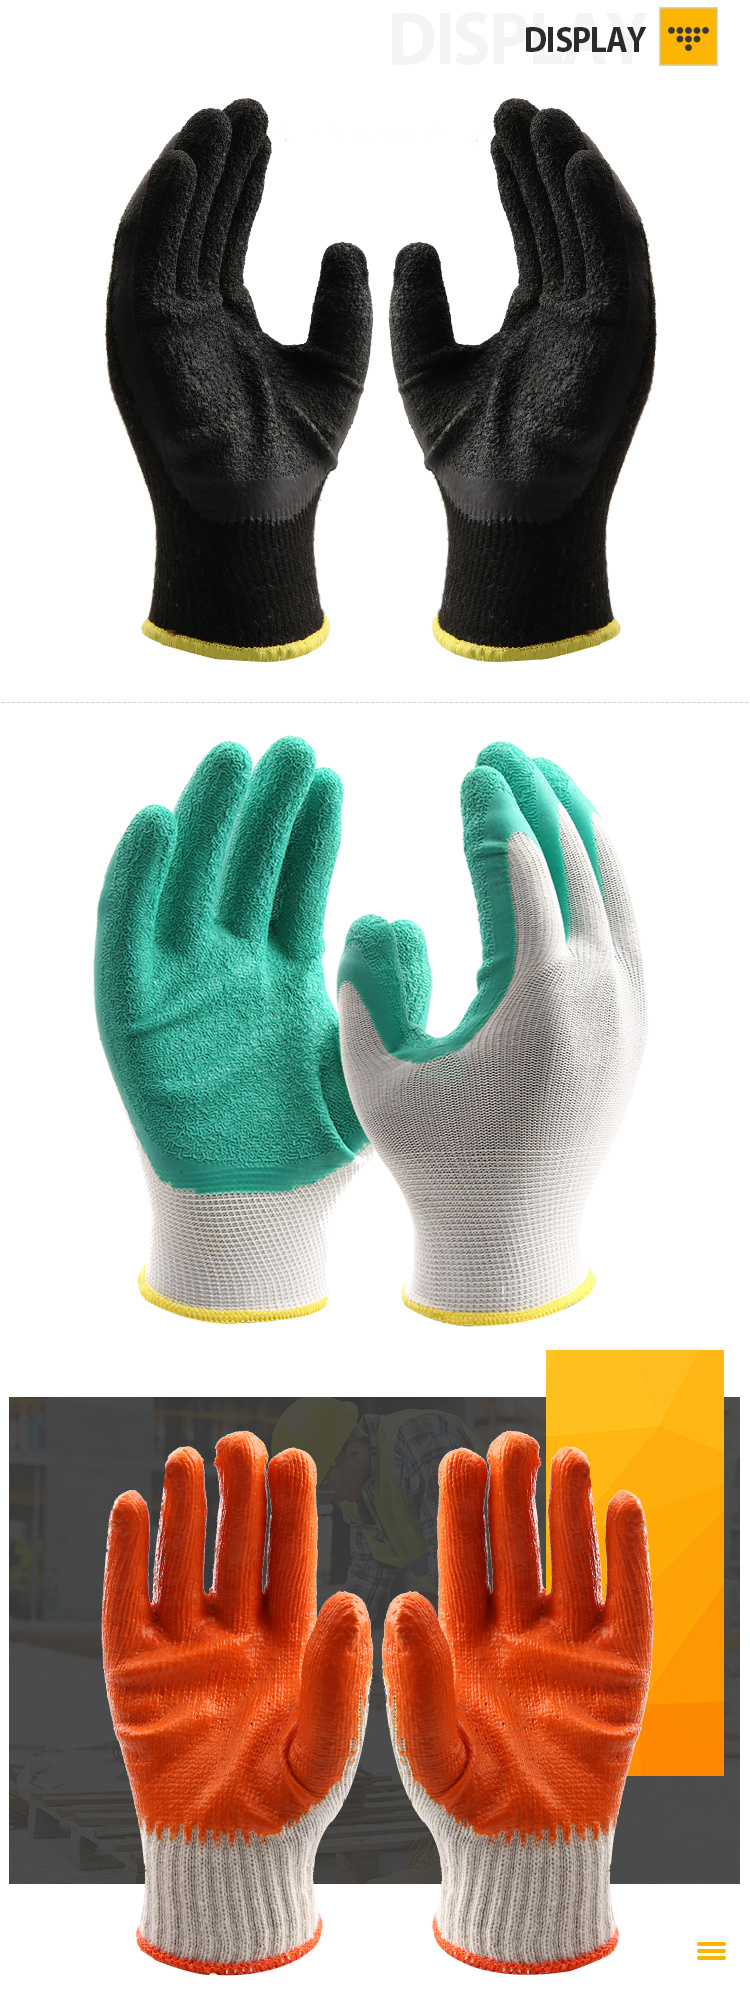 Rubber Coated Cotton Gloves for Safety Protection